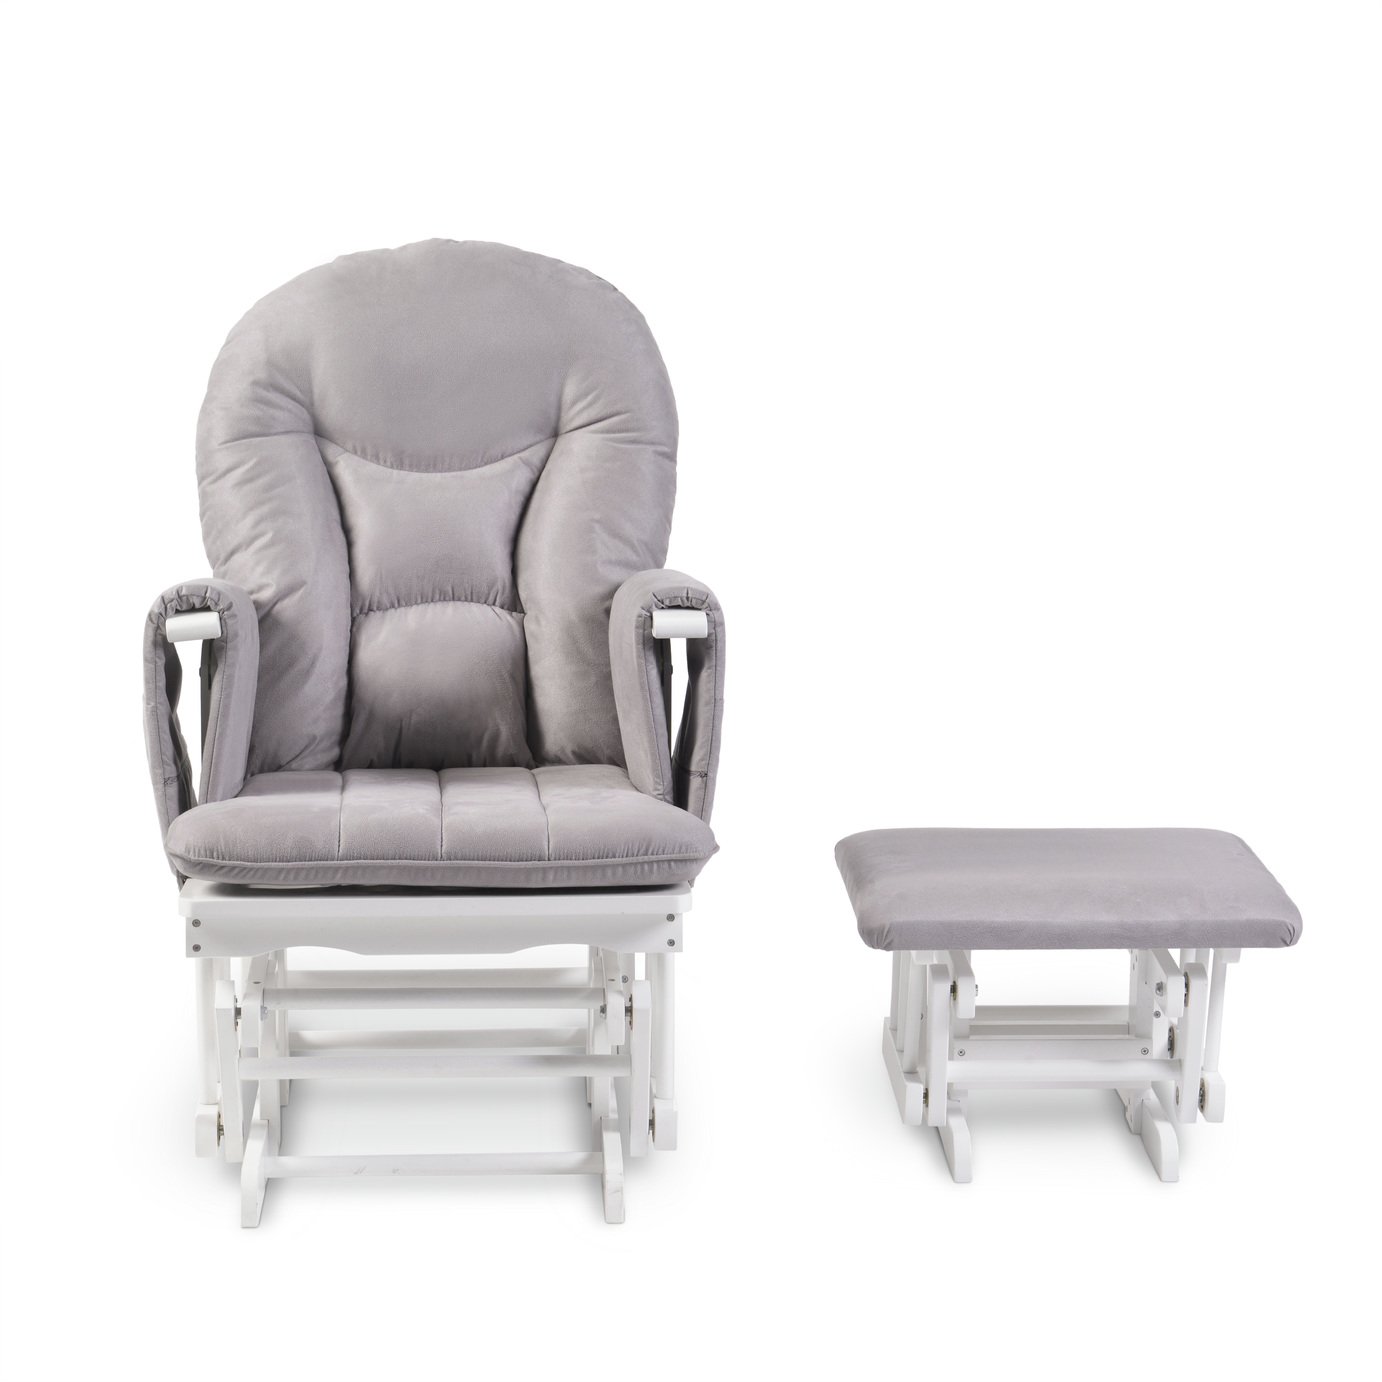 Babyhoot Alford Reclining Glider Chair and Stool Review